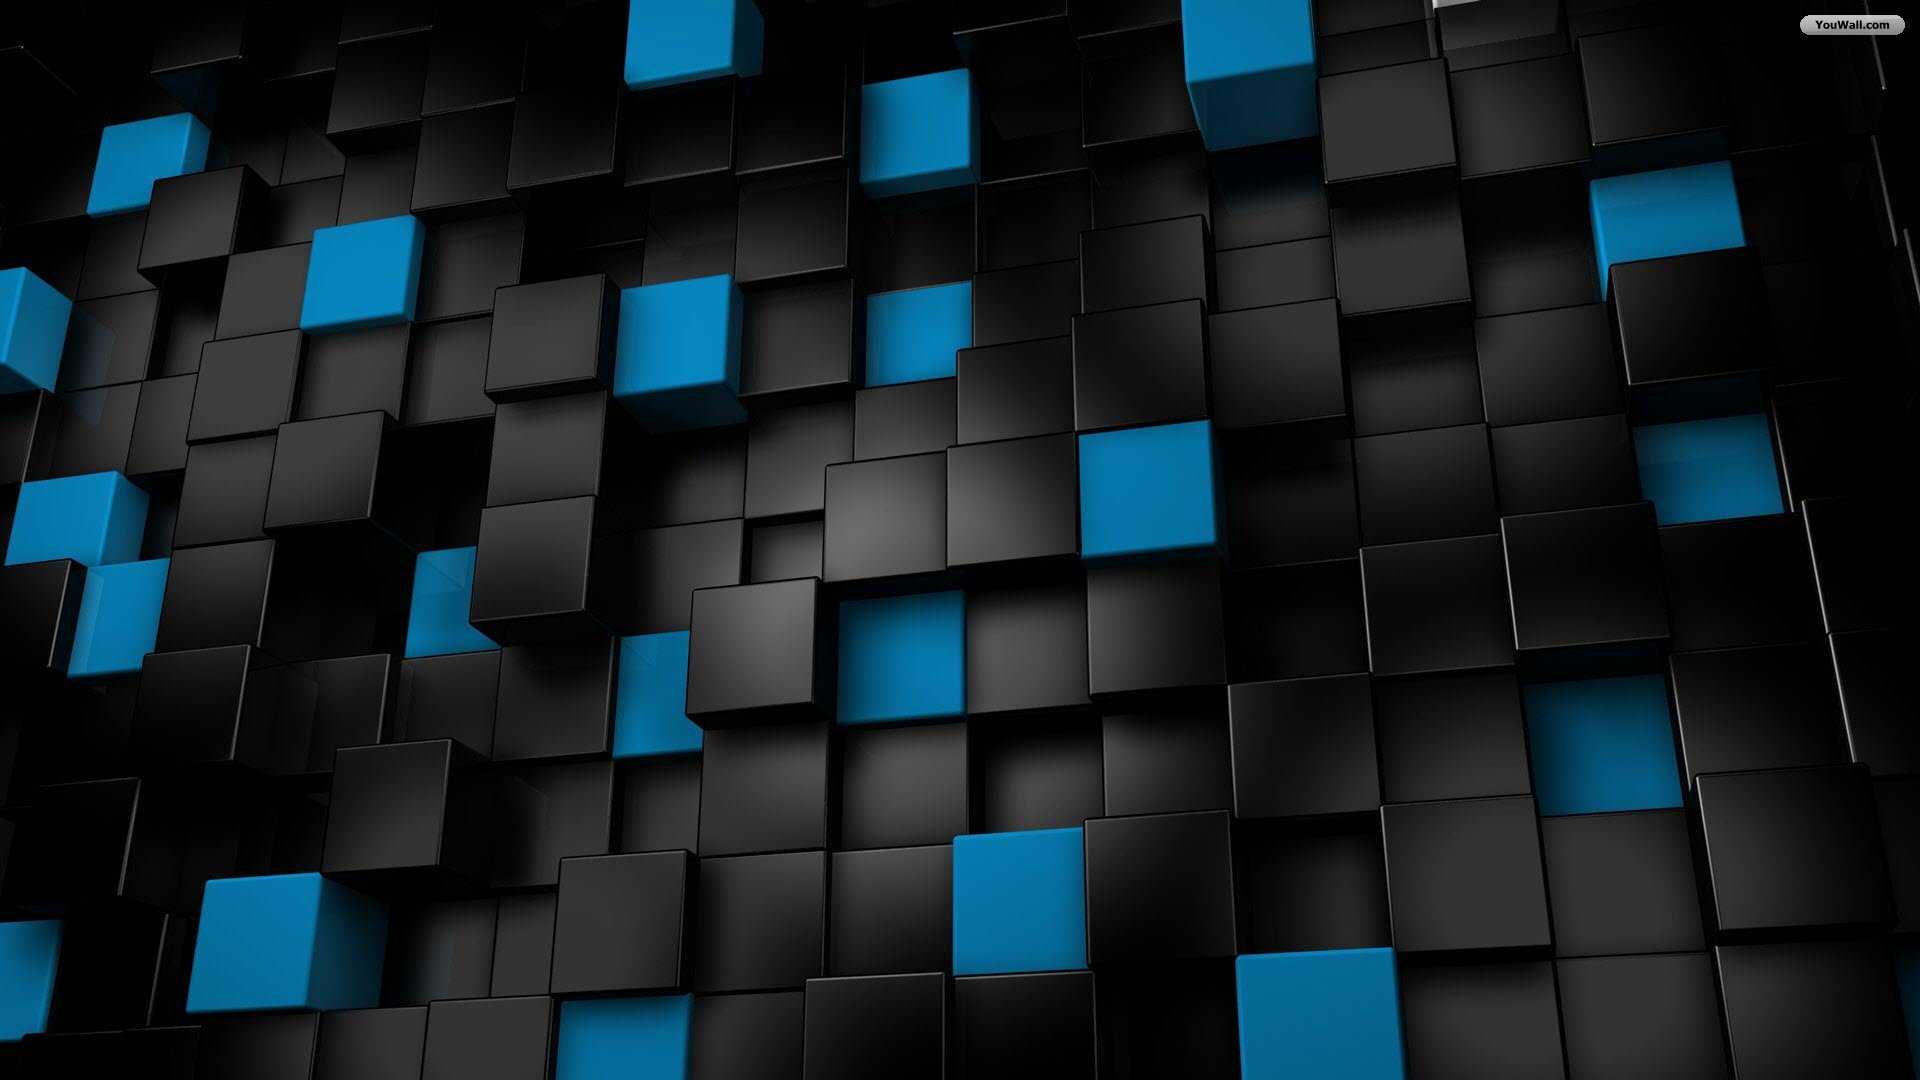 Black And Blue Cubes Wallpaper Full HD High Resolution Of Mobile